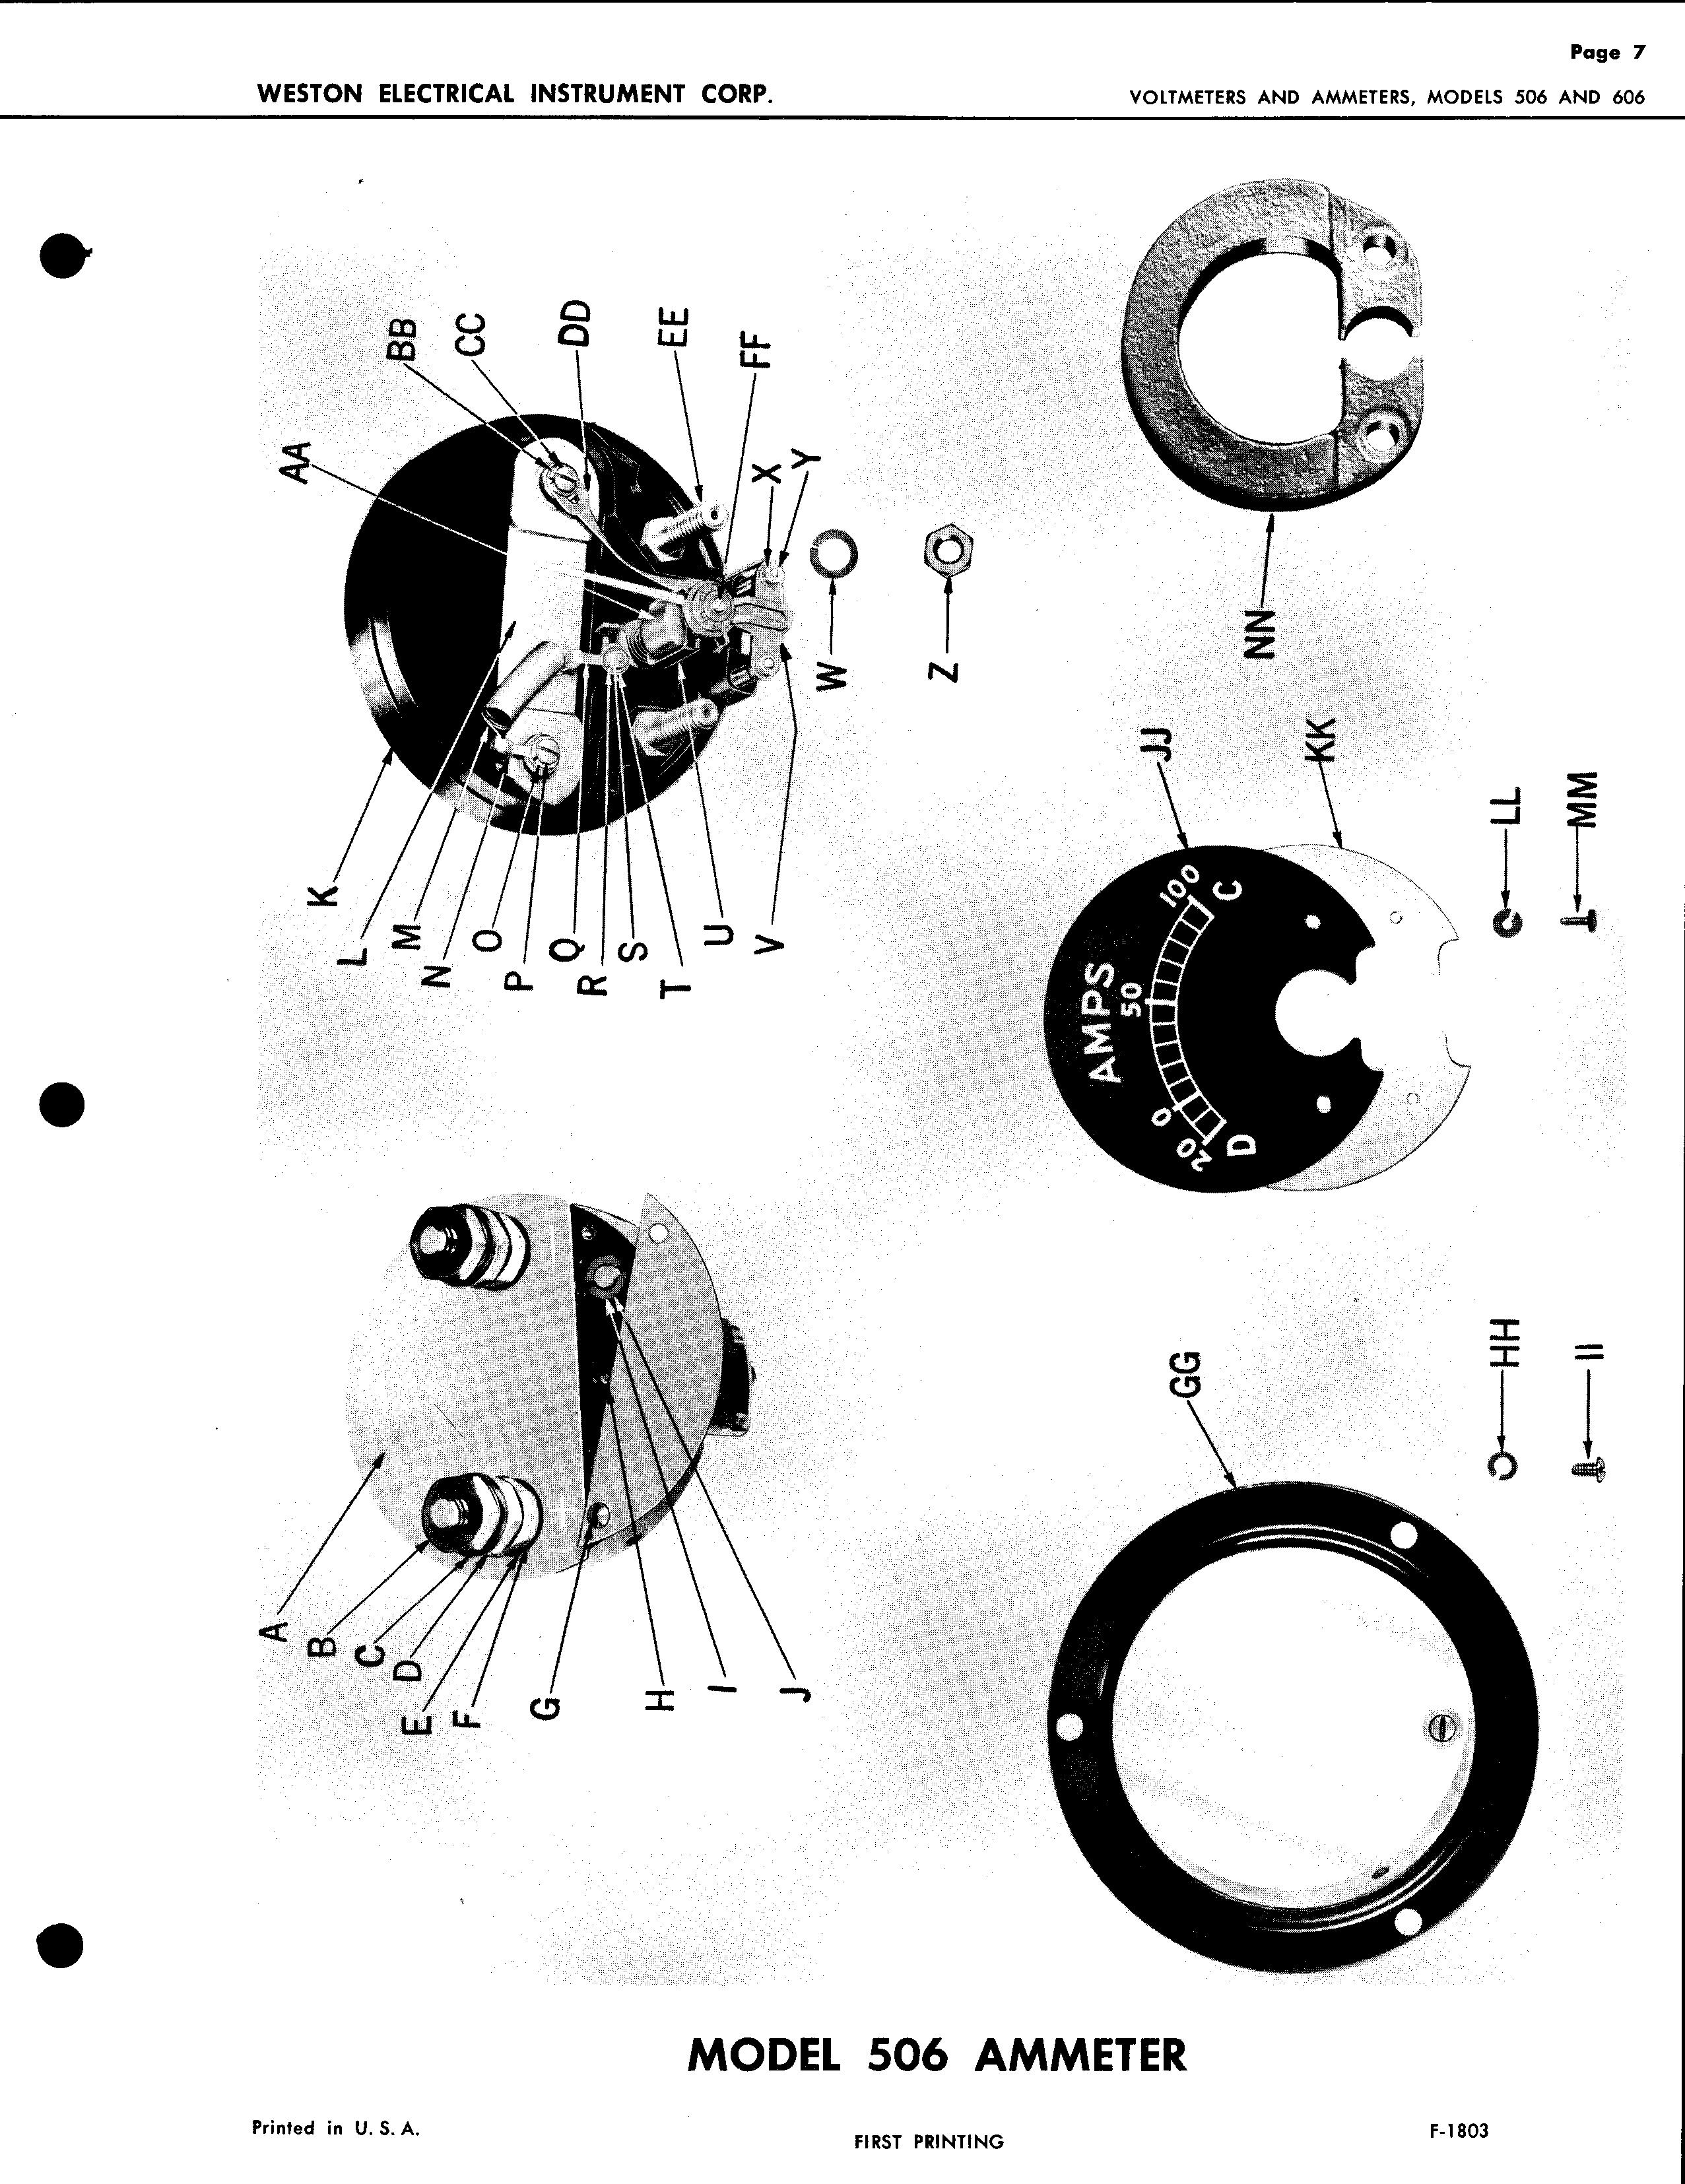 Sample page 7 from AirCorps Library document: Service Instructions for Models 506 & 606 Voltmeters and Ammeters